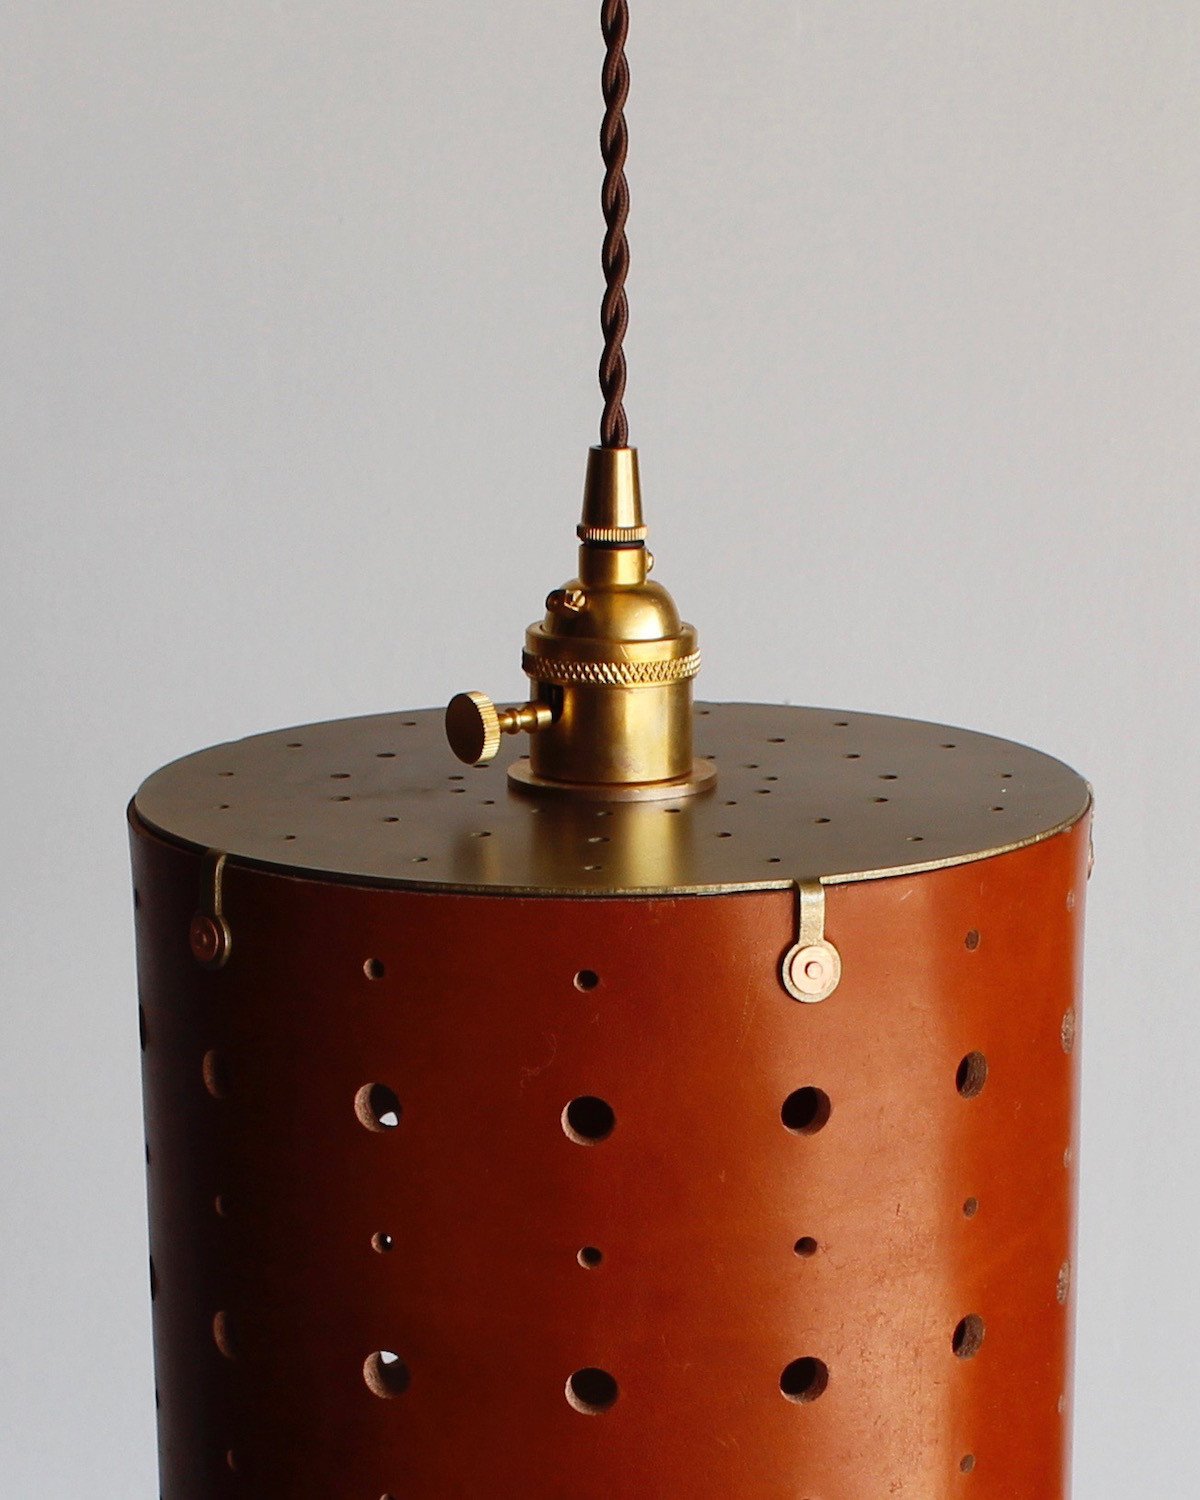 Tan leather cylinder pendant with handstitched, perforated leather shade. Made by Lostine in Philadelphia. Hardwired or plug light fixture. Simple interior design, made in the USA.